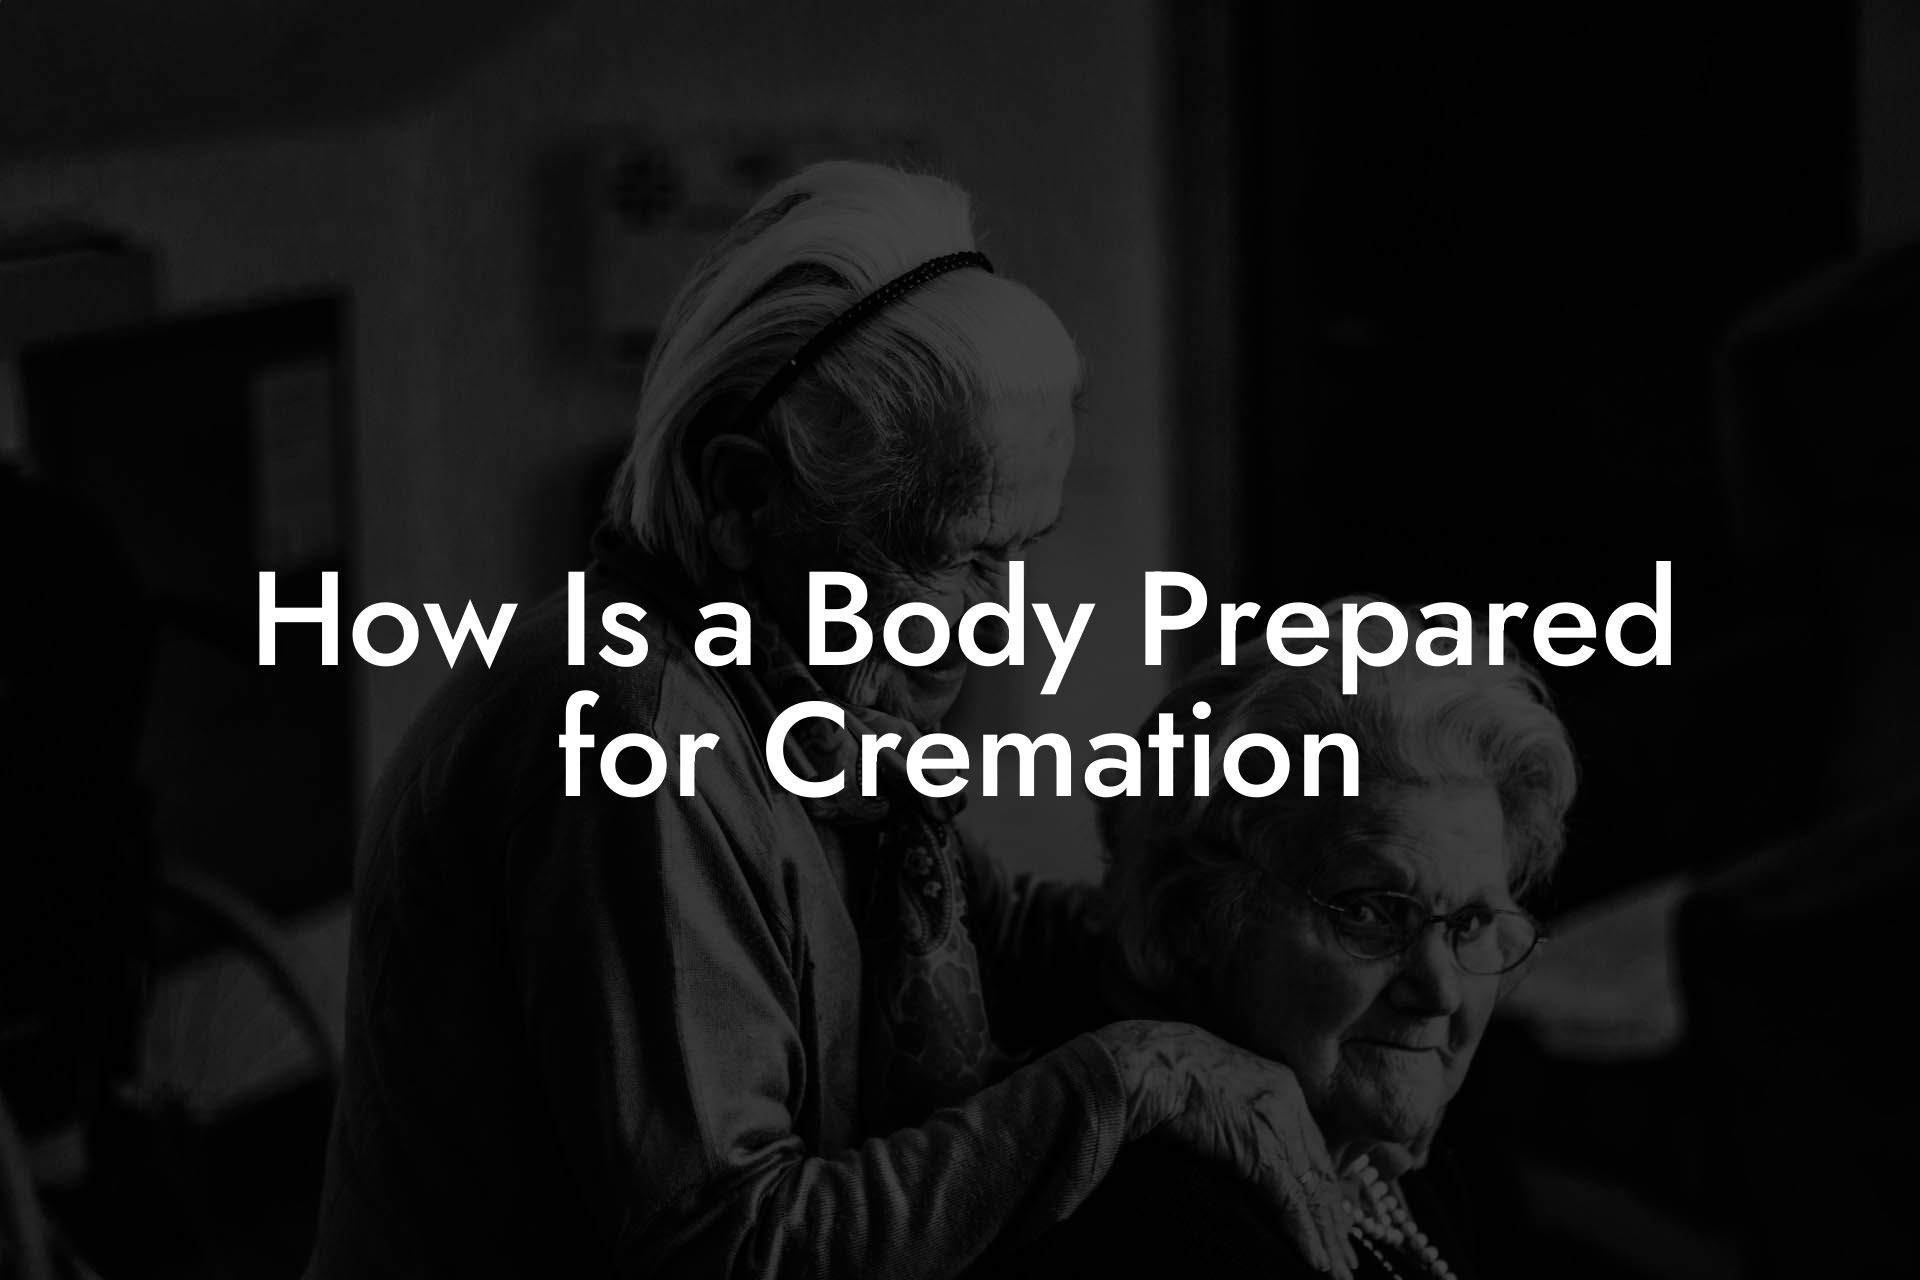 How Is a Body Prepared for Cremation